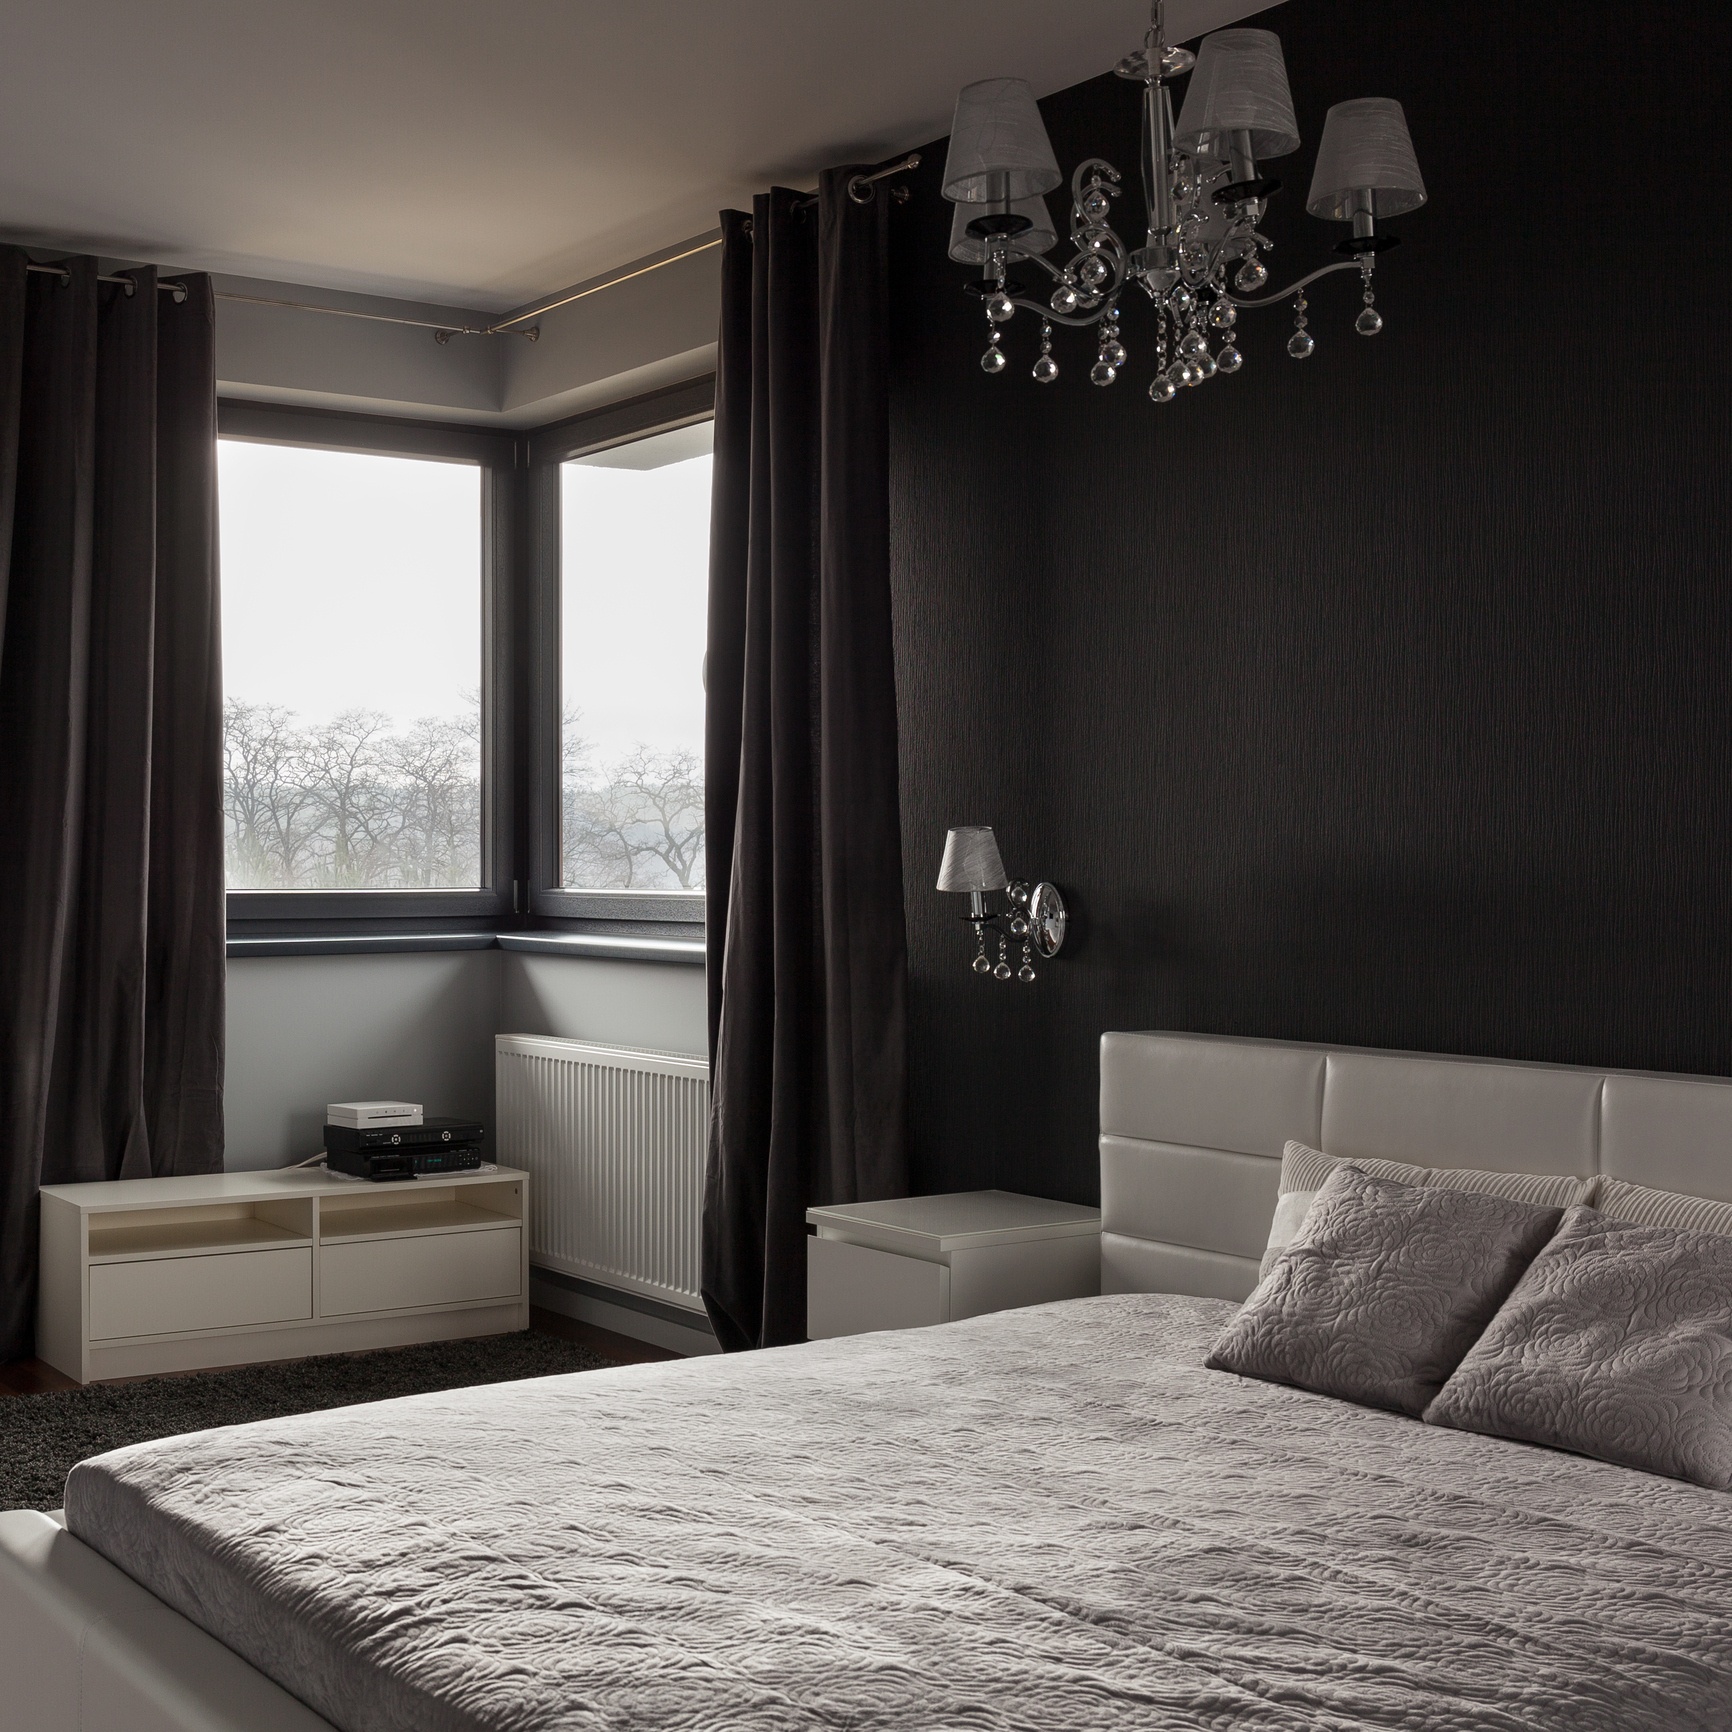 Dark bedroom with black accent wall